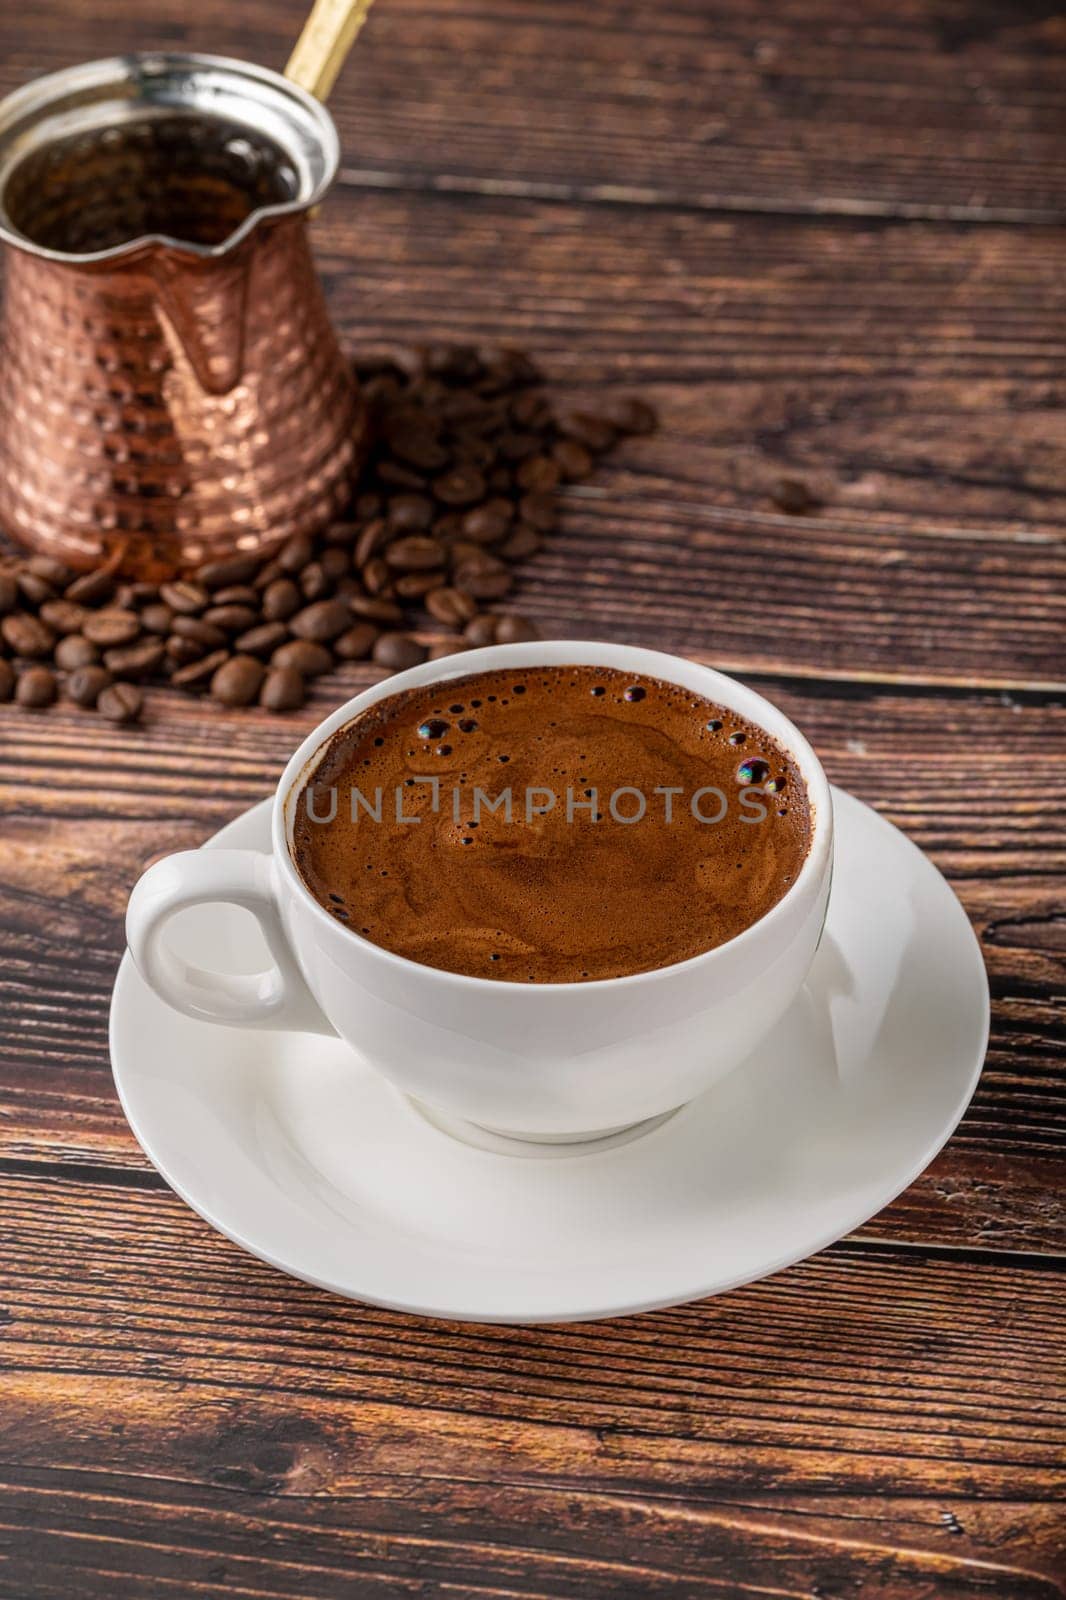 Double Turkish coffee in a white porcelain cup with a decorative coffee pot on a wooden table